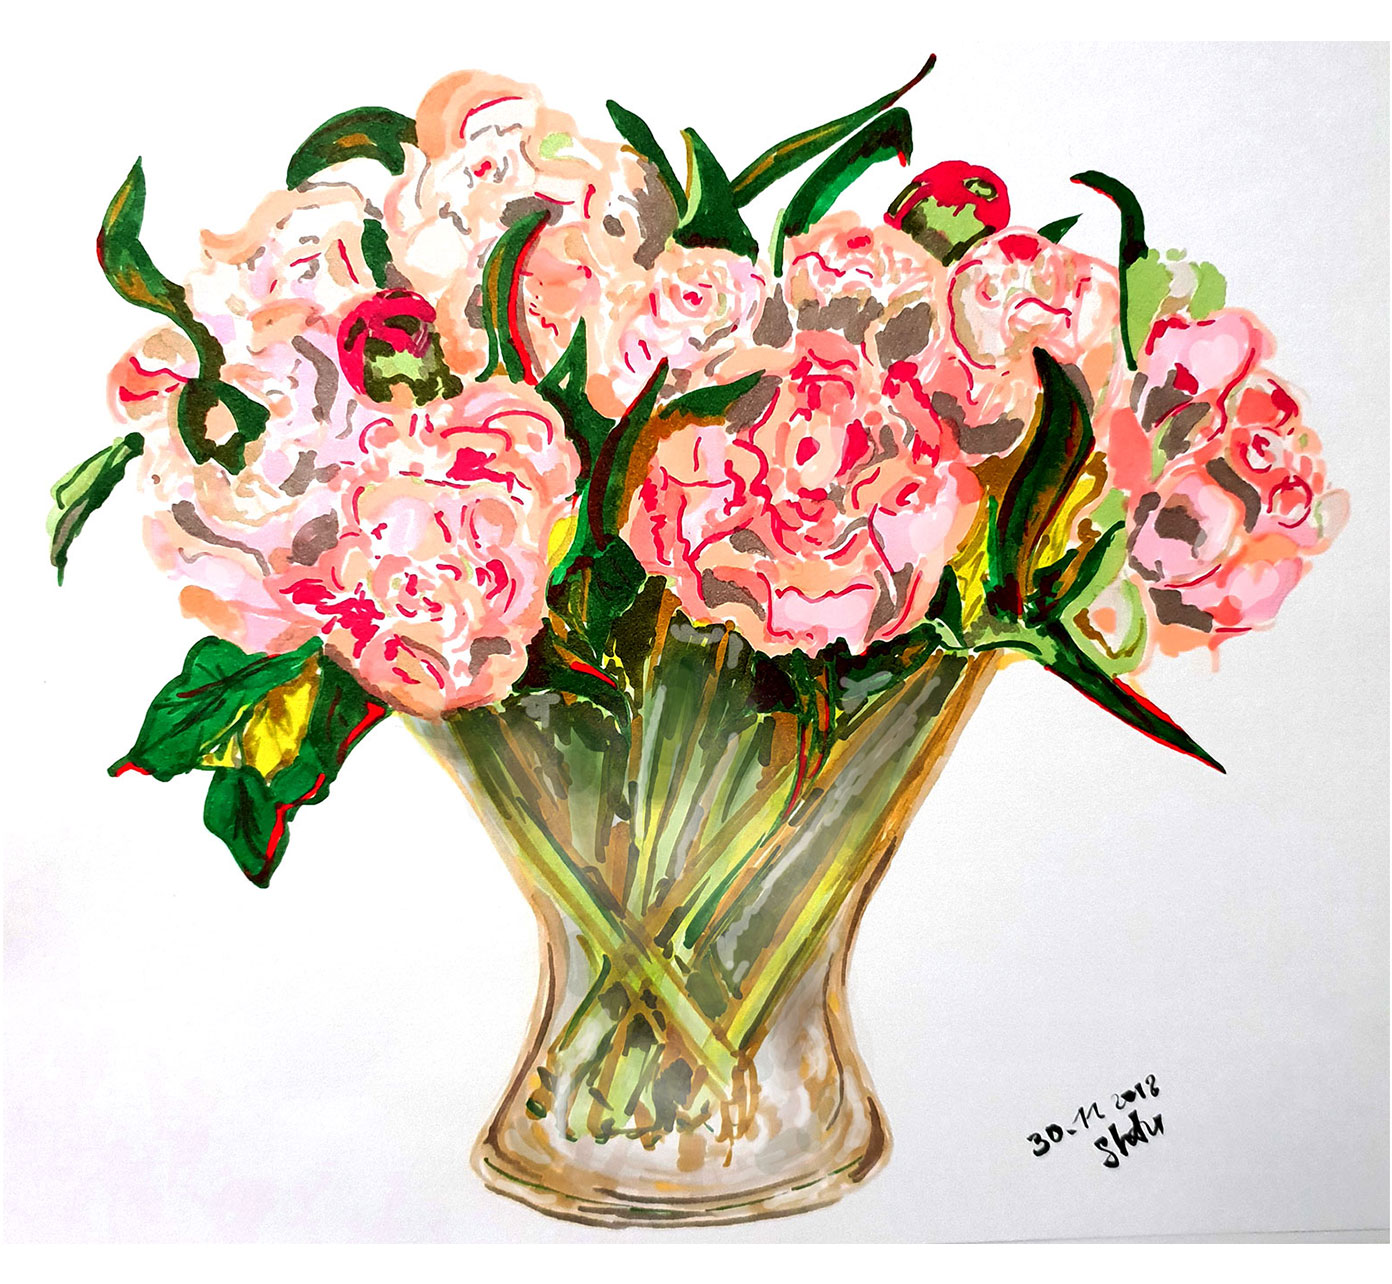 The First Drawings With Copic Sketch Markers How To Draw With Copics Shtukensia Gallery Pencil drawing tutorial this video decorative surahi pitcher pot with flower drawing easy .this channel is all about how to. shtukensia gallery